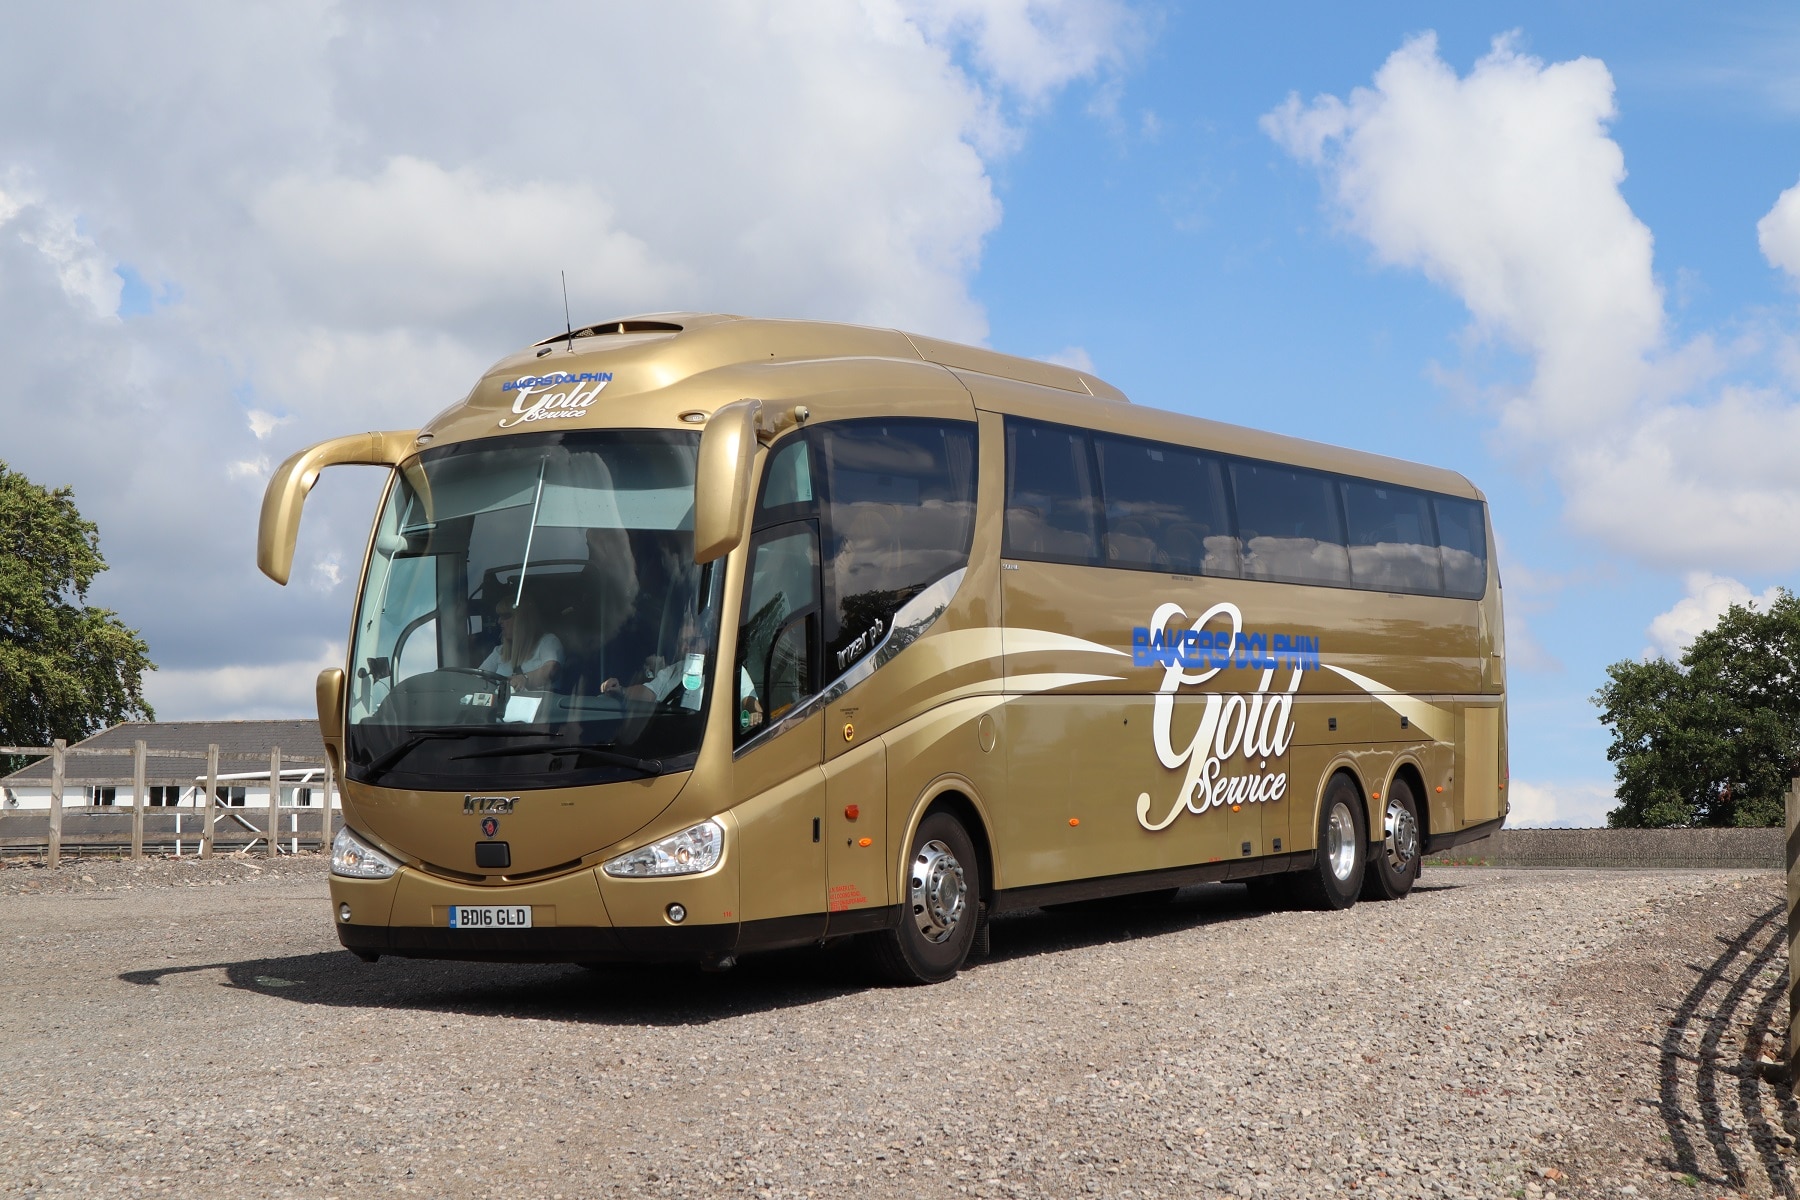 Bakers Dolphin Gold tour coach